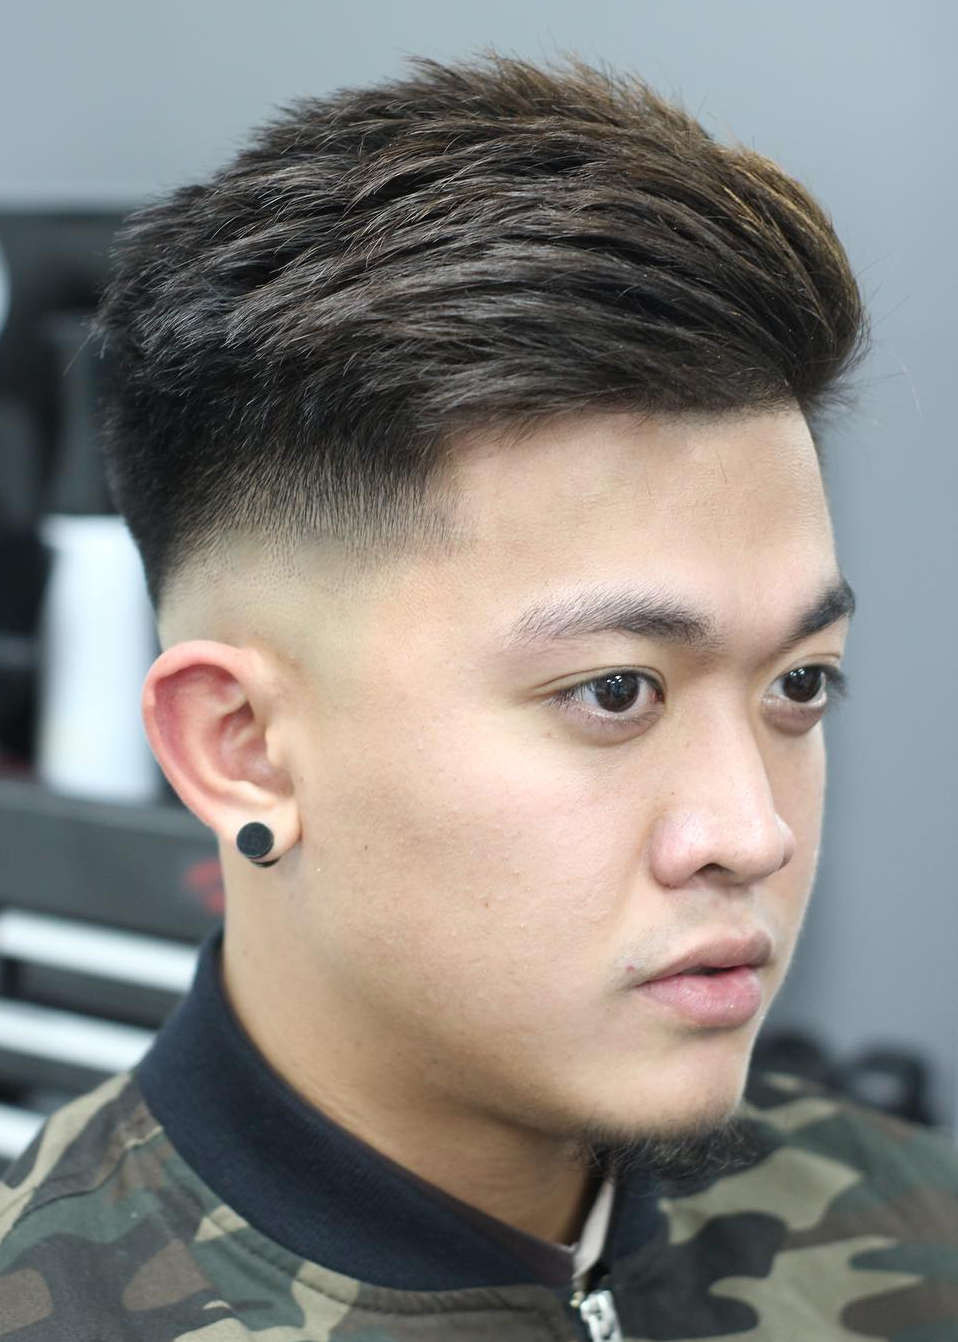 Mens Asian Hairstyle
 25 Asian Men Hairstyles Style Up with the Avid Variety of